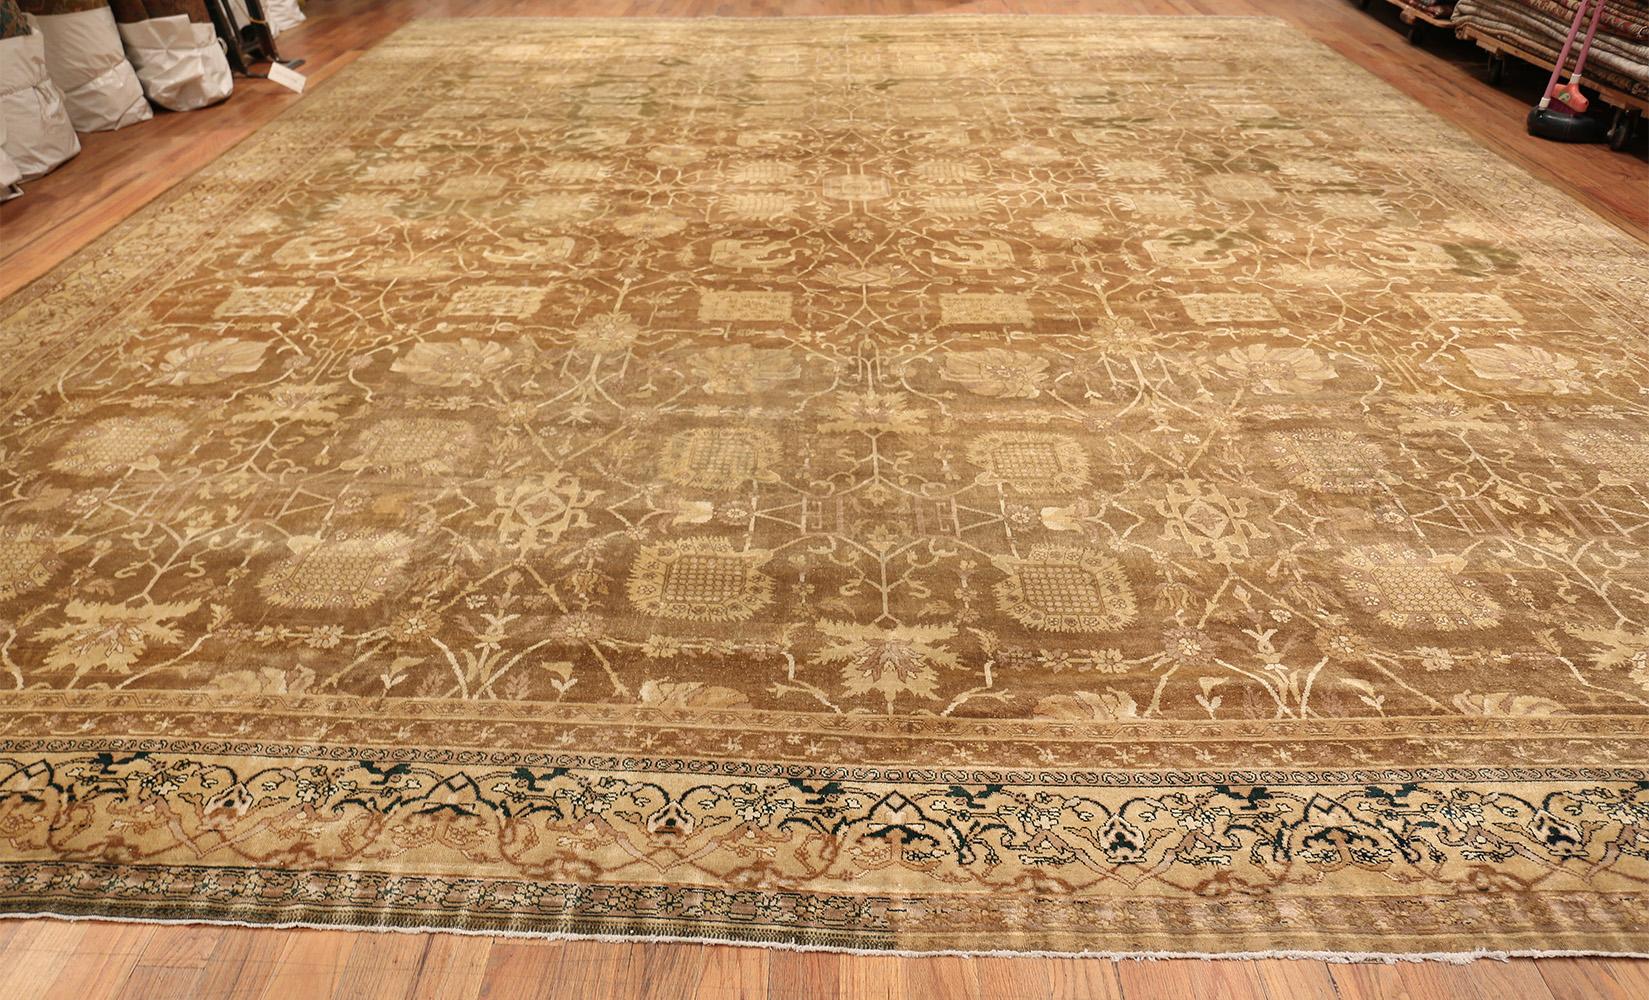 Beautiful large Indian vase Design Antique Amritsar rug, Country Of Origin / Rug Type: Antique Indian rug, circa Date: Late 19th century. Size: 14 ft 8 in x 17 ft 5 in (4.47 m x 5.31 m)

